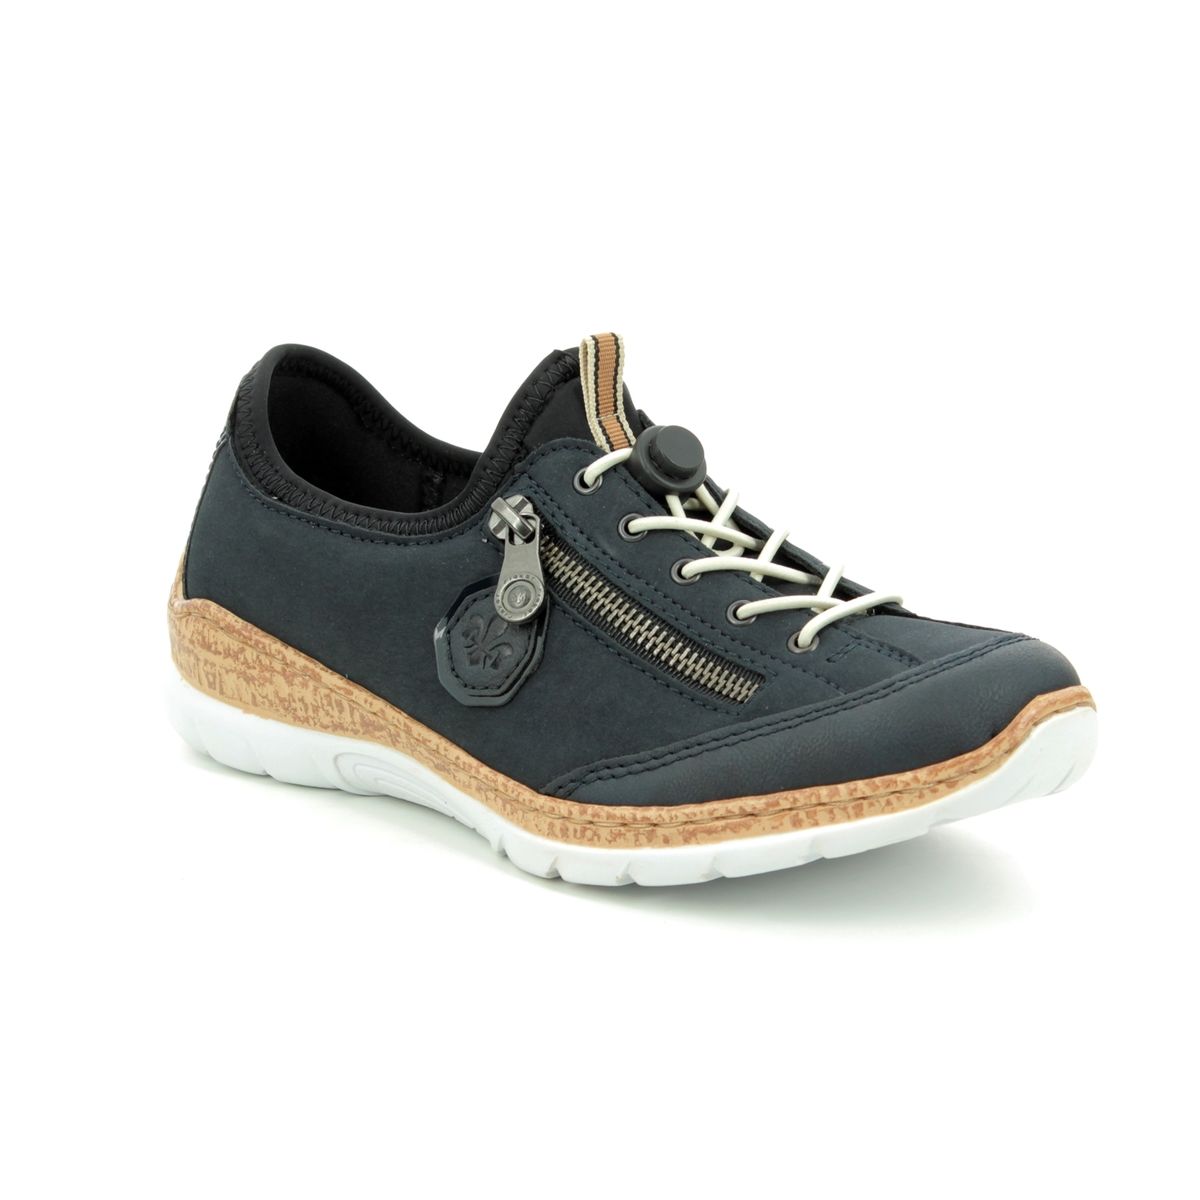 Rieker Empirico Navy Womens Lacing Shoes N4263-14 In Size 39 In Plain Navy